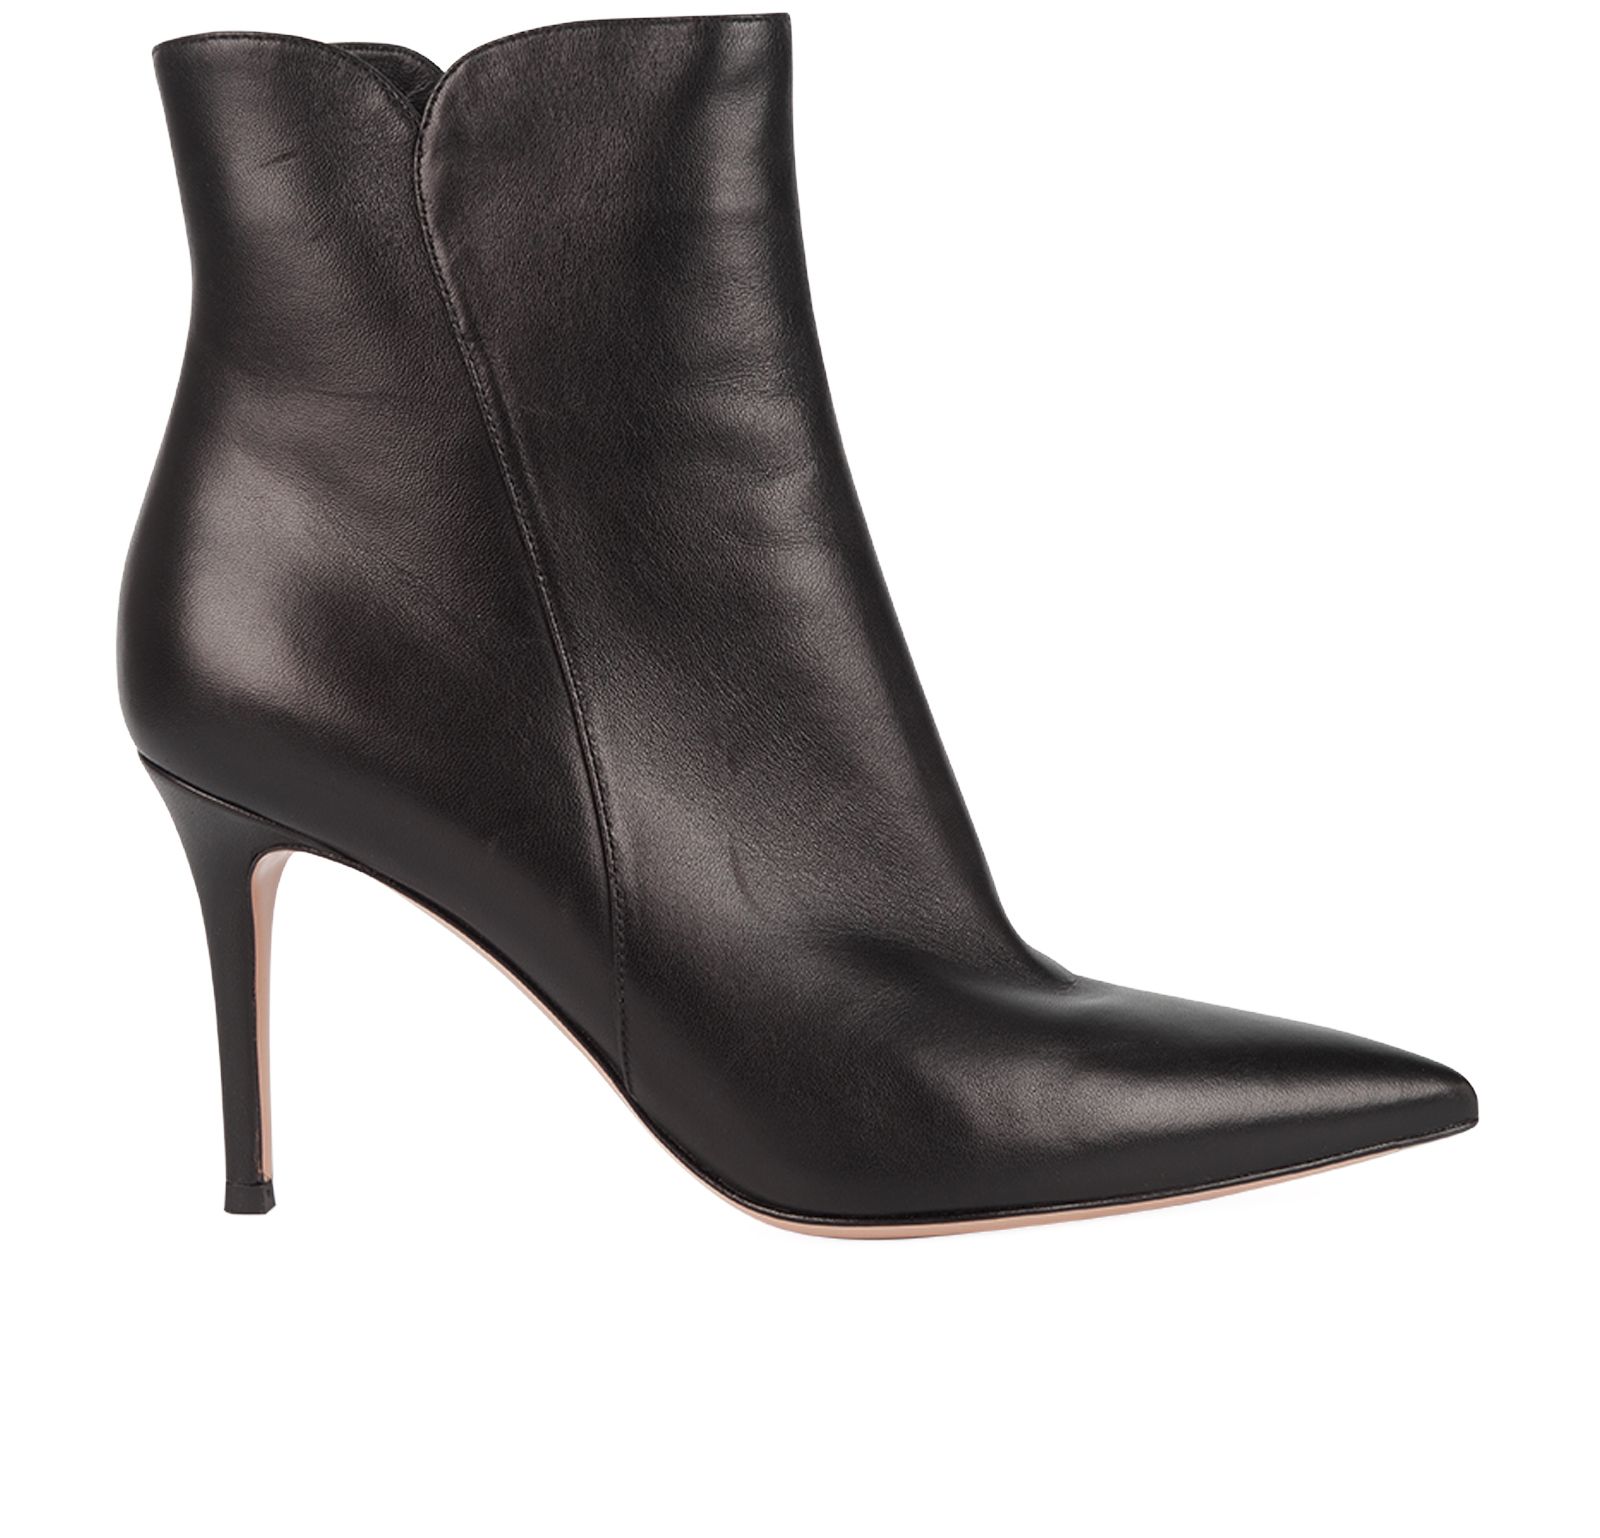 Gianvito Rossi Levy 85 Ankle Boots, Boots - Designer Exchange | Buy ...